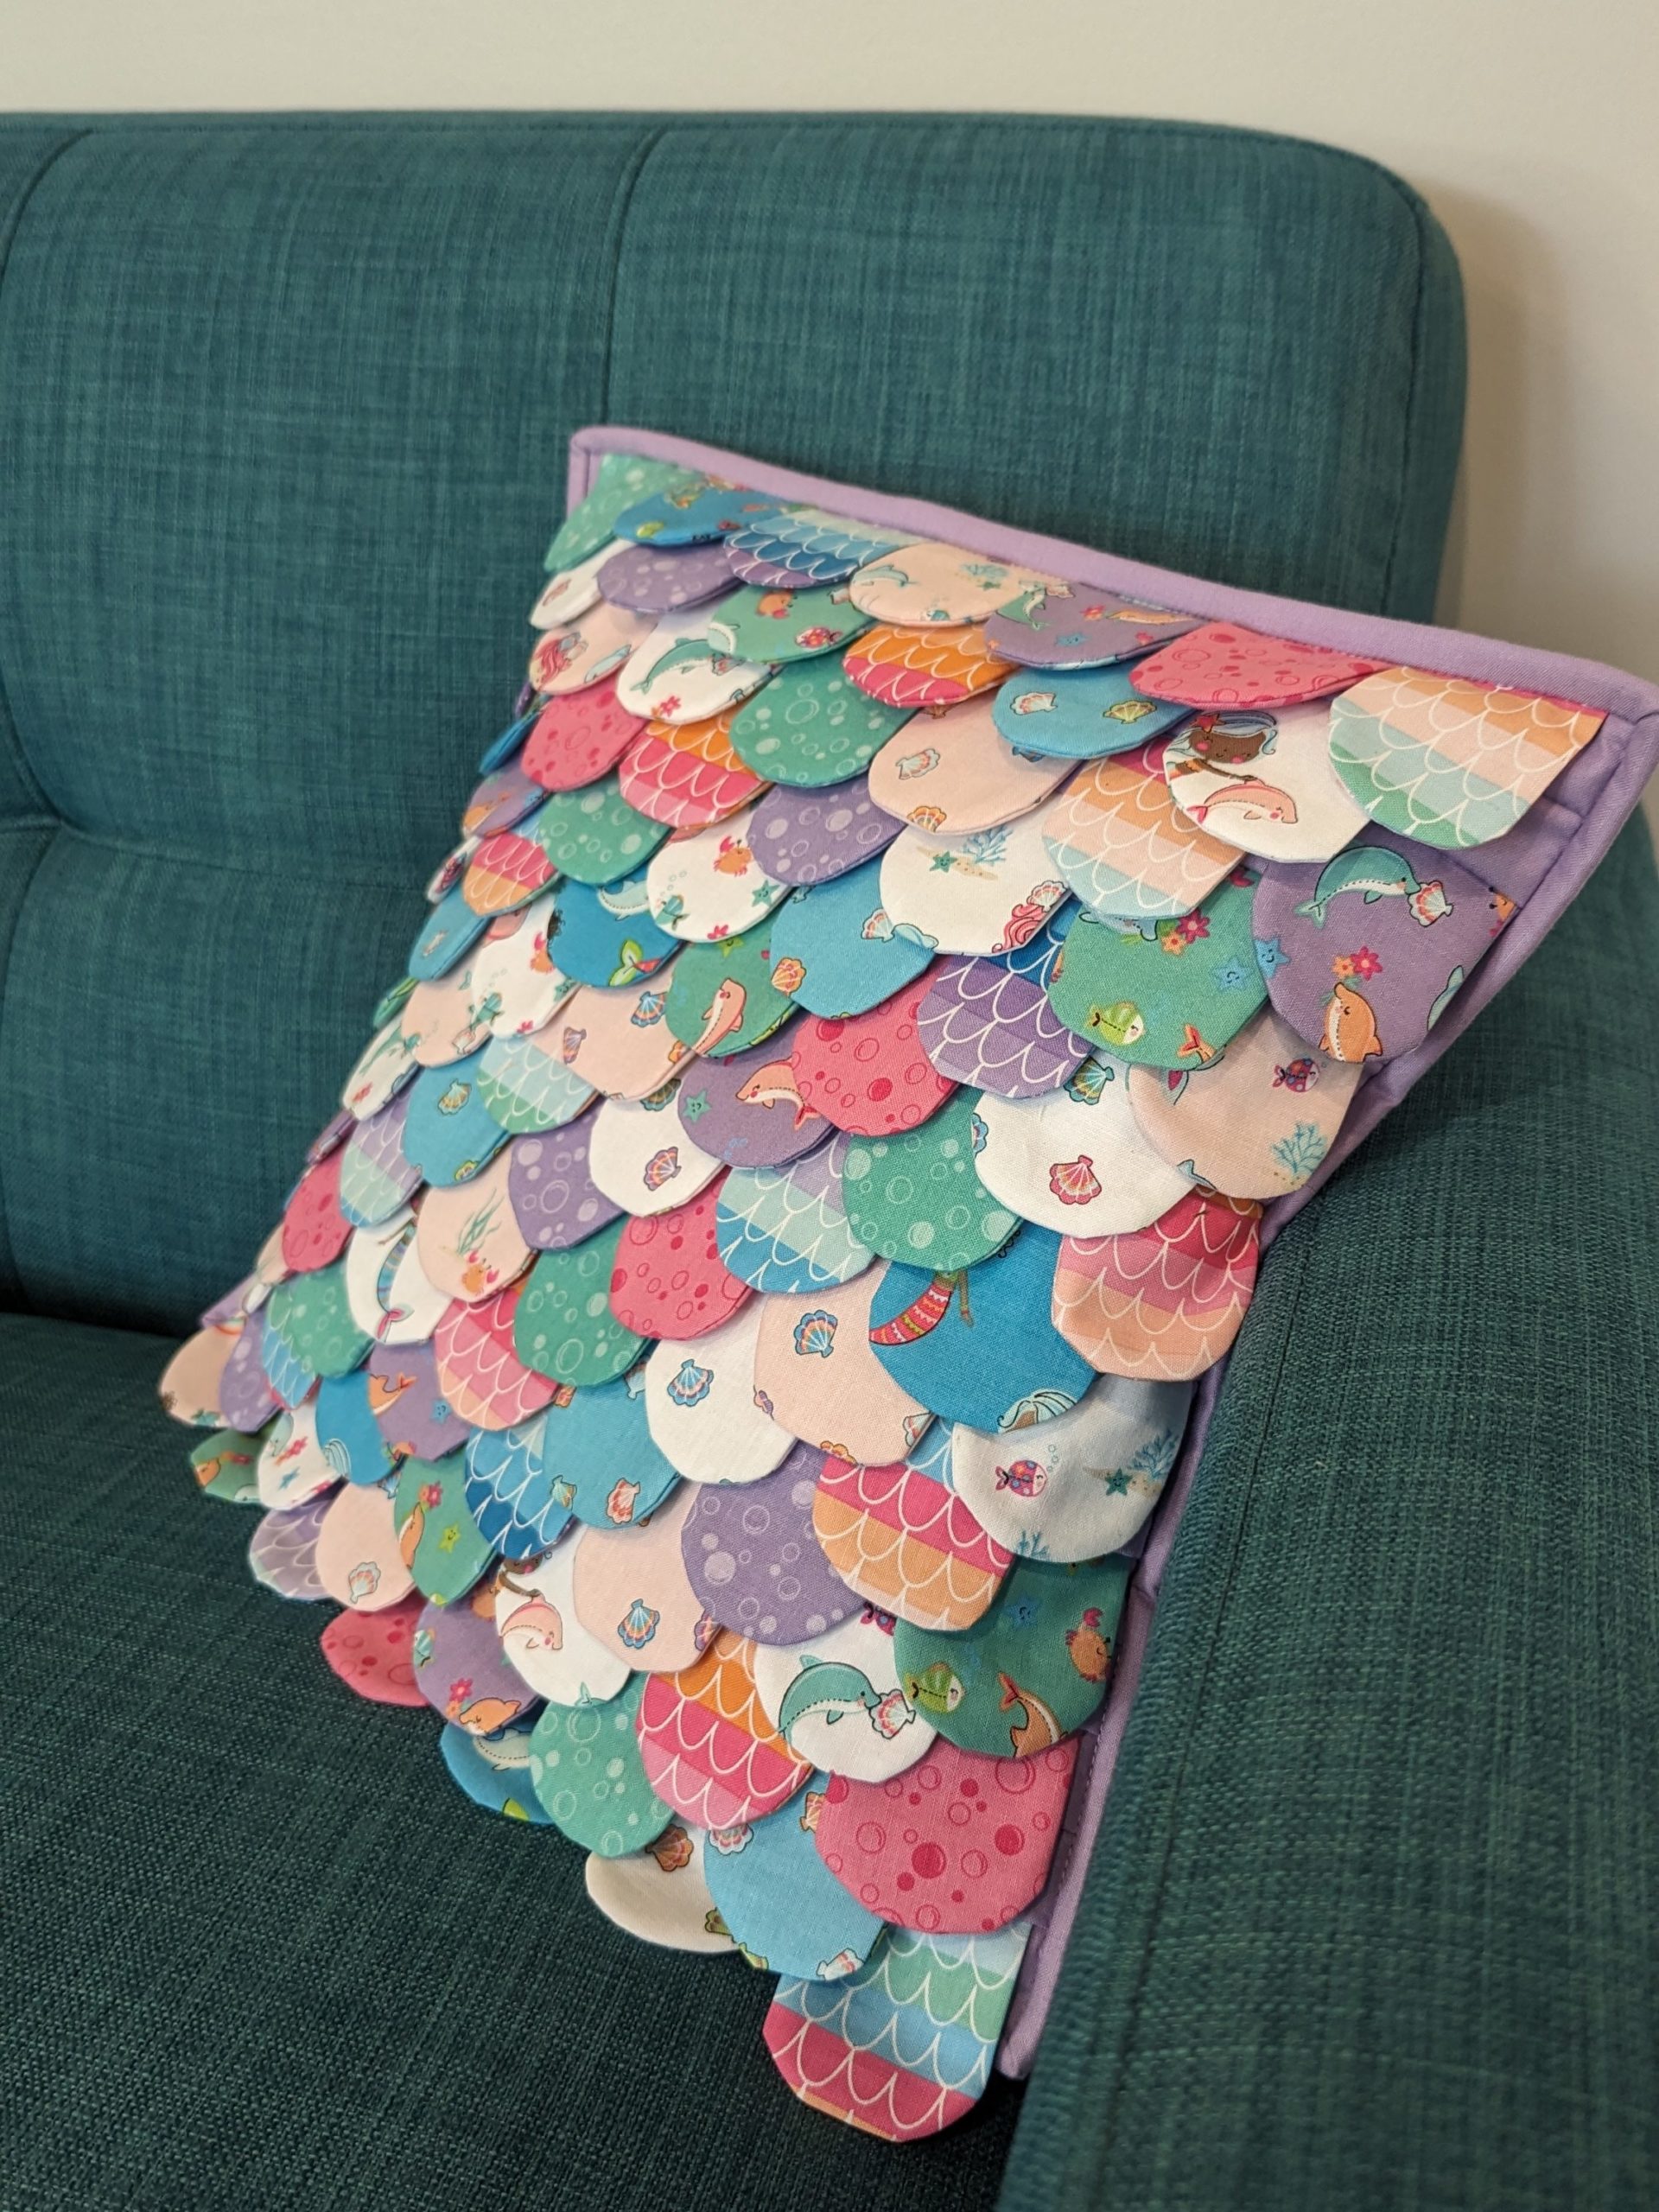 Mermaid pillow with 3-d fabric scales from the Mer-Mazing fabric collection